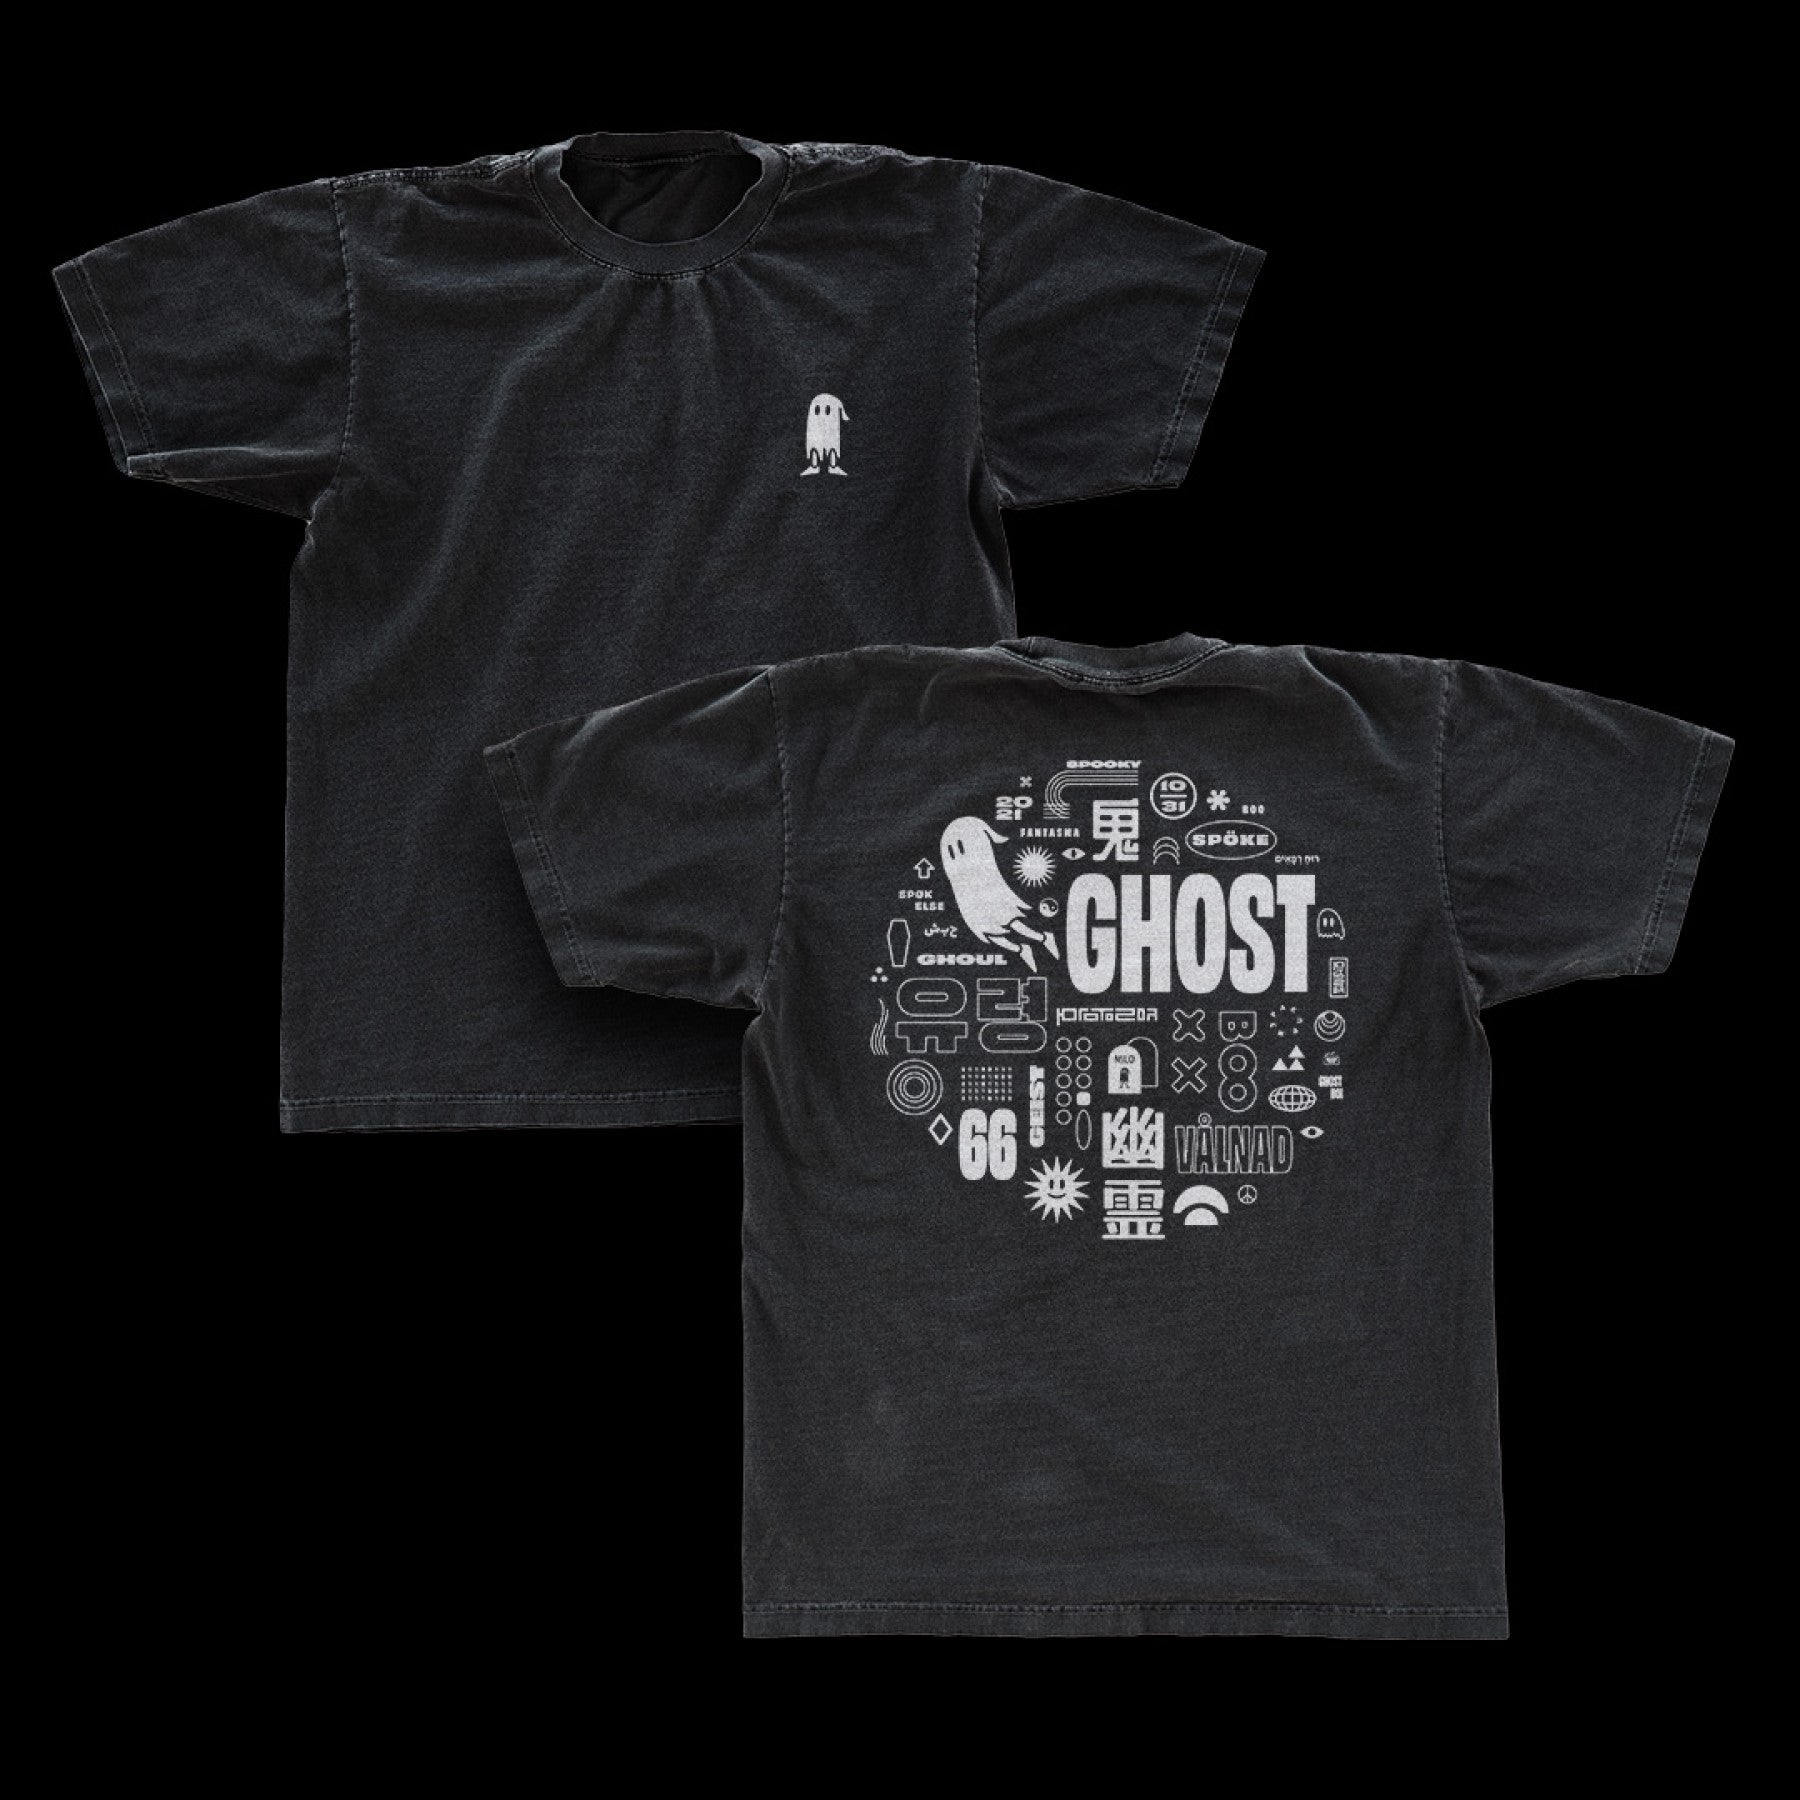 Group-Buy Ghost T-Shirt